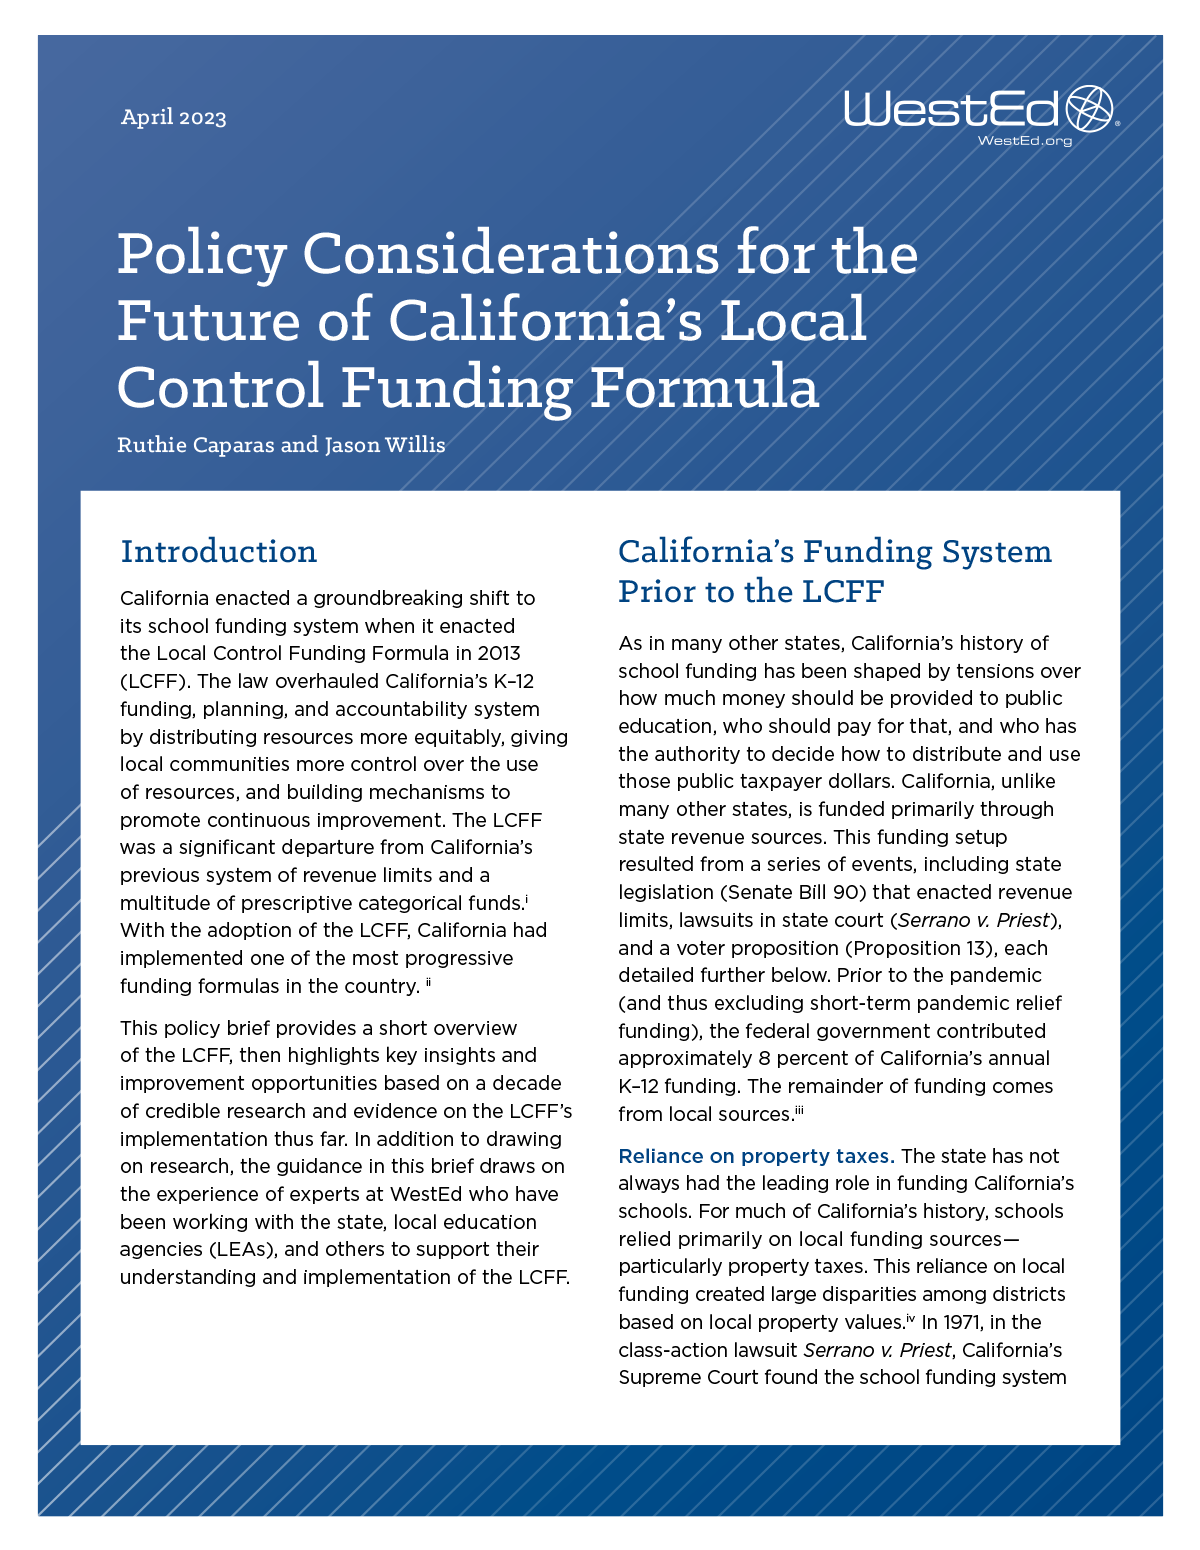 Policy Considerations for the Future of California's Local Control Funding Formula